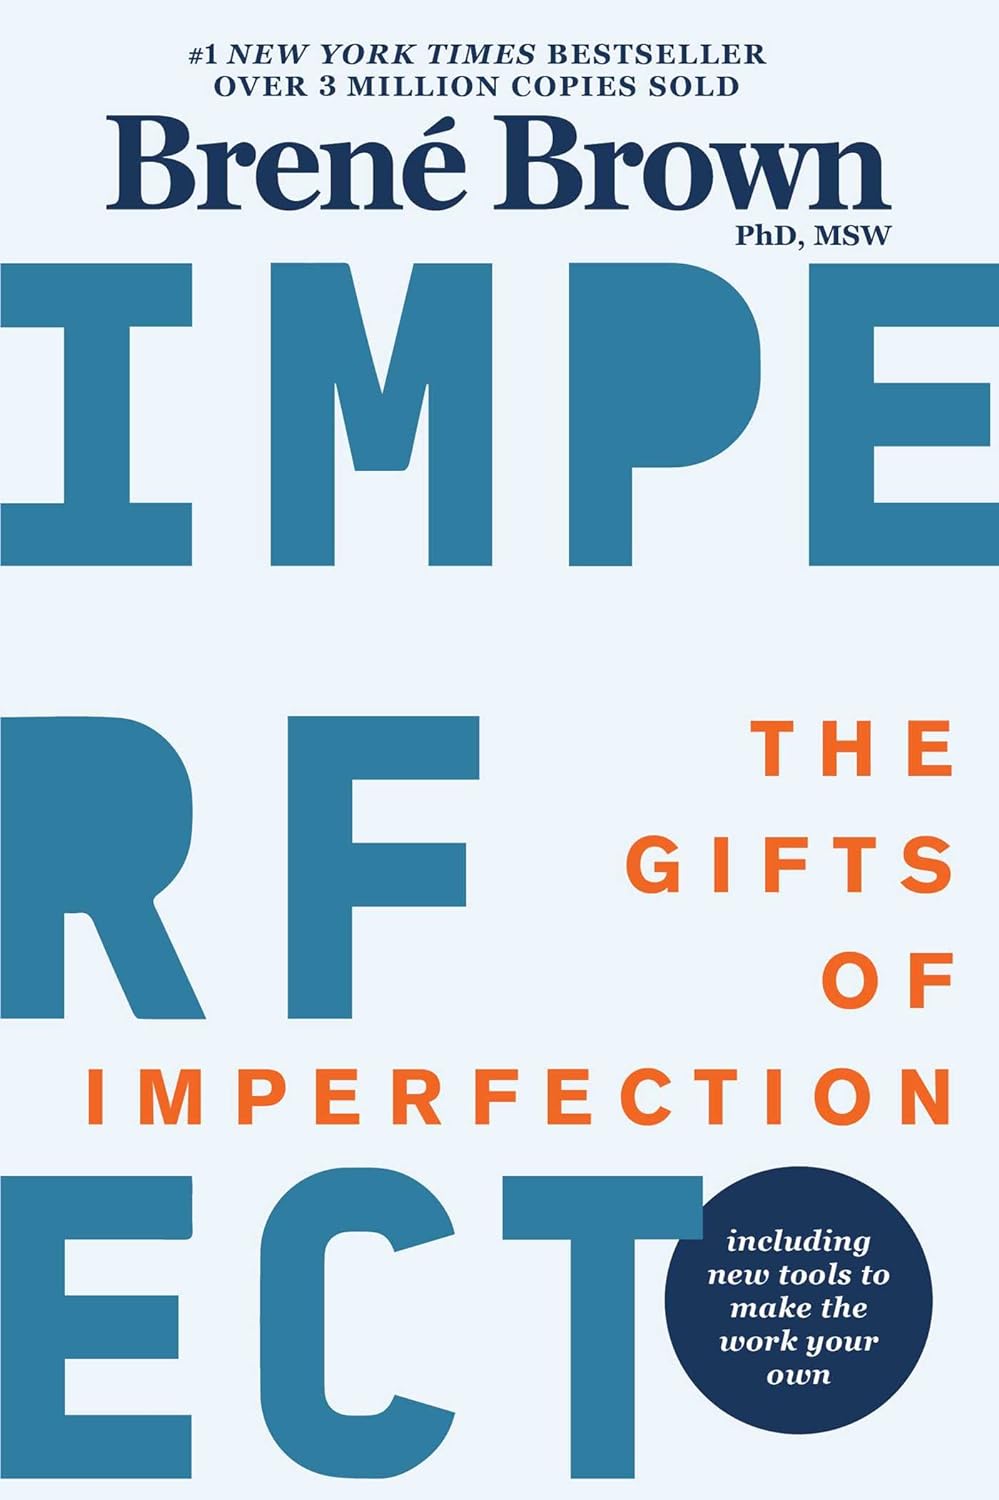 Book Cover - The Gifts of Imperfection by Brene Brown